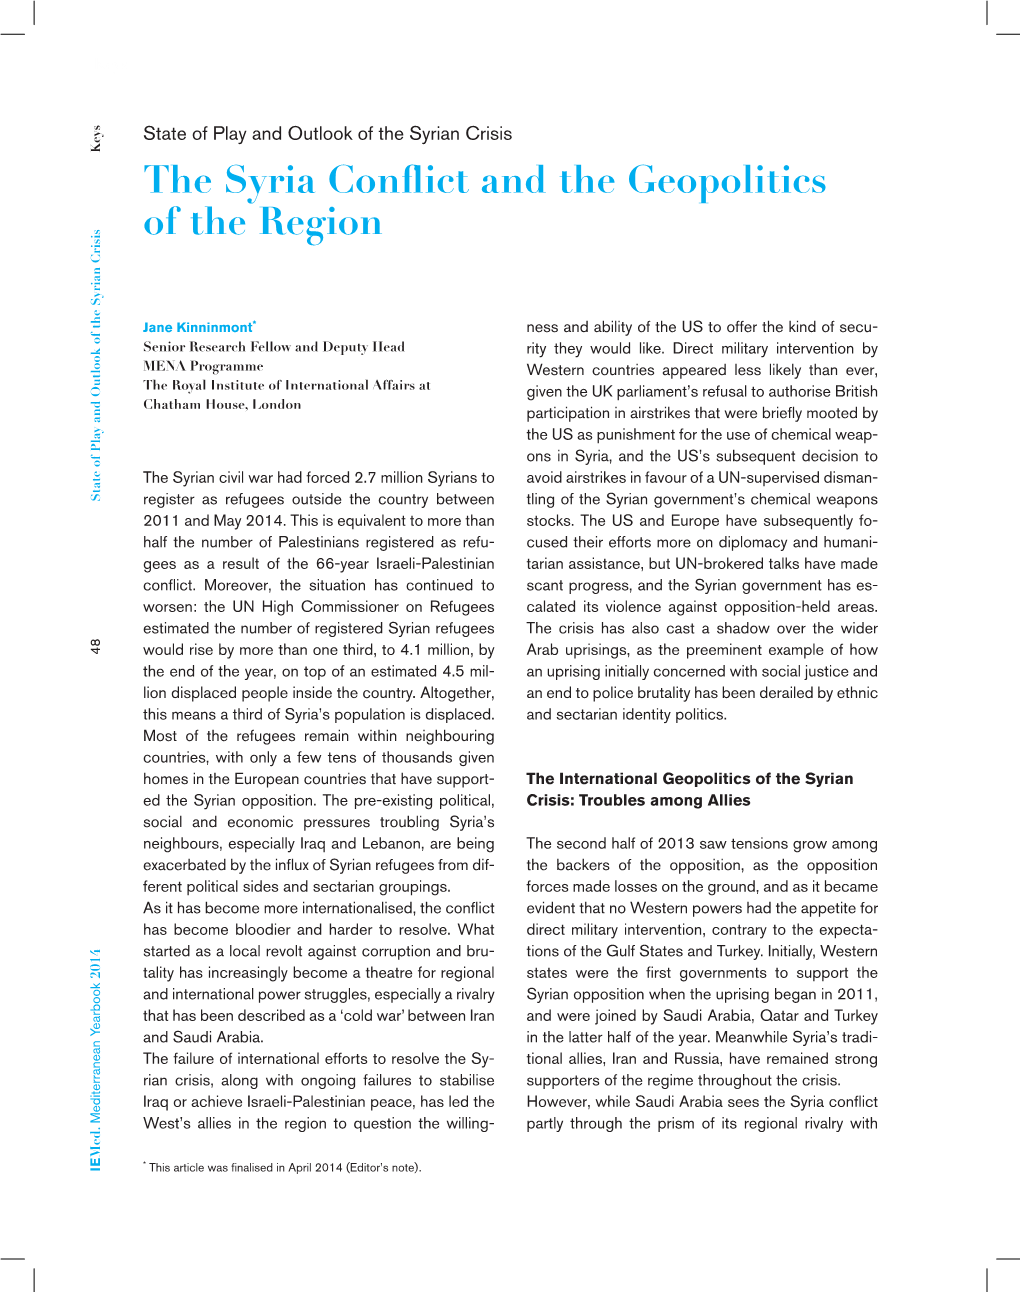 The Syria Conflict and the Geopolitics of the Region